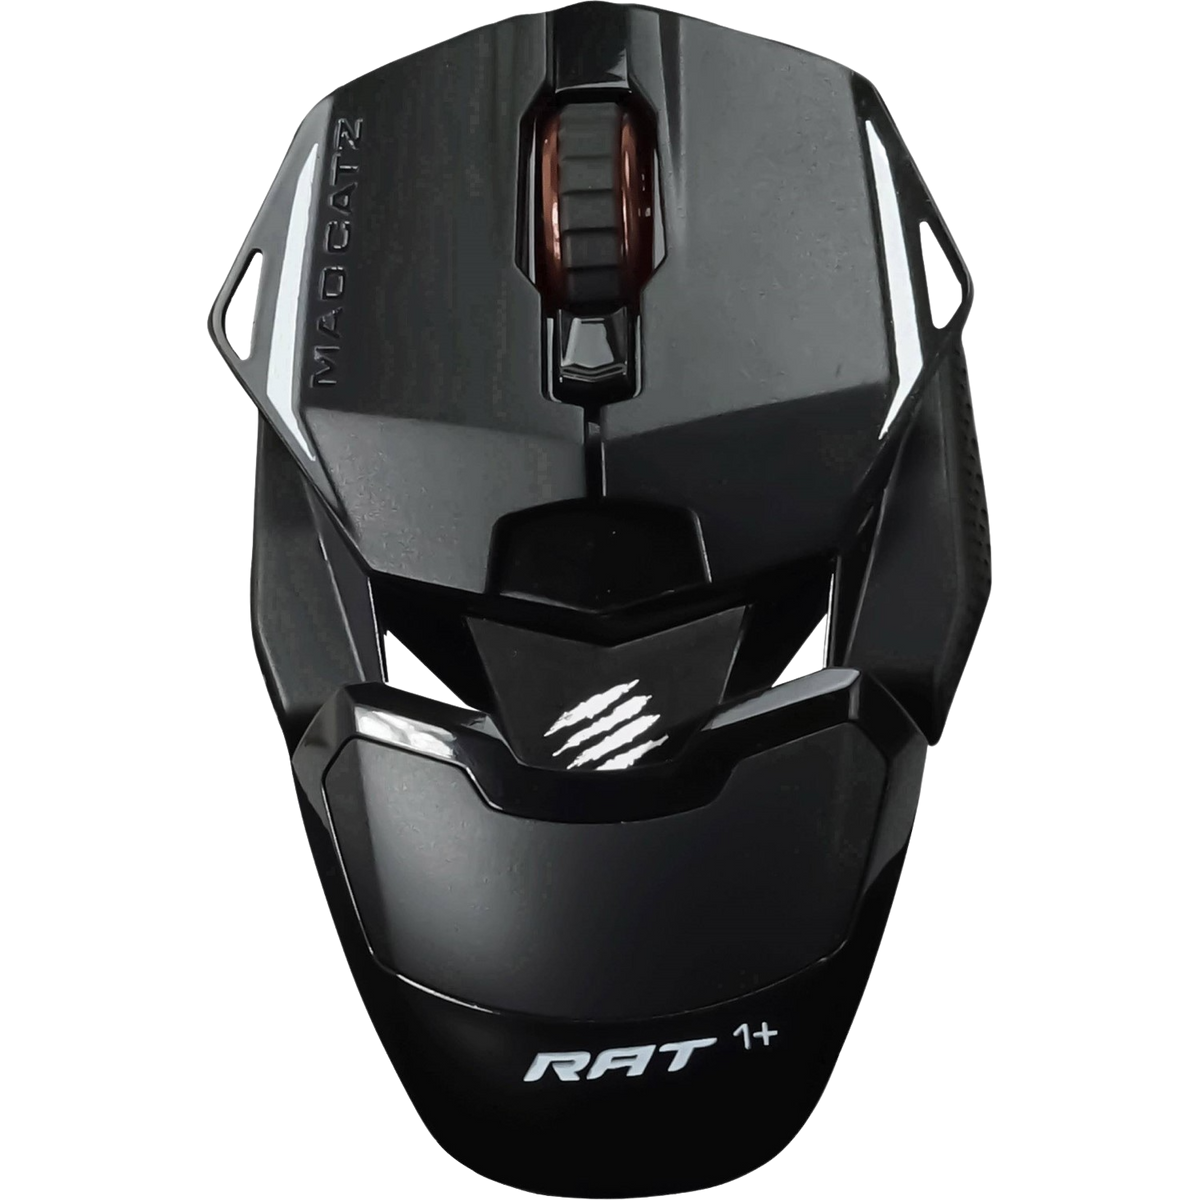 MOUSE, BL Schwarz Maus, Gaming GAMING 1+ OPTICAL CATZ MR01MCINBL000-0 R.A.T. MAD